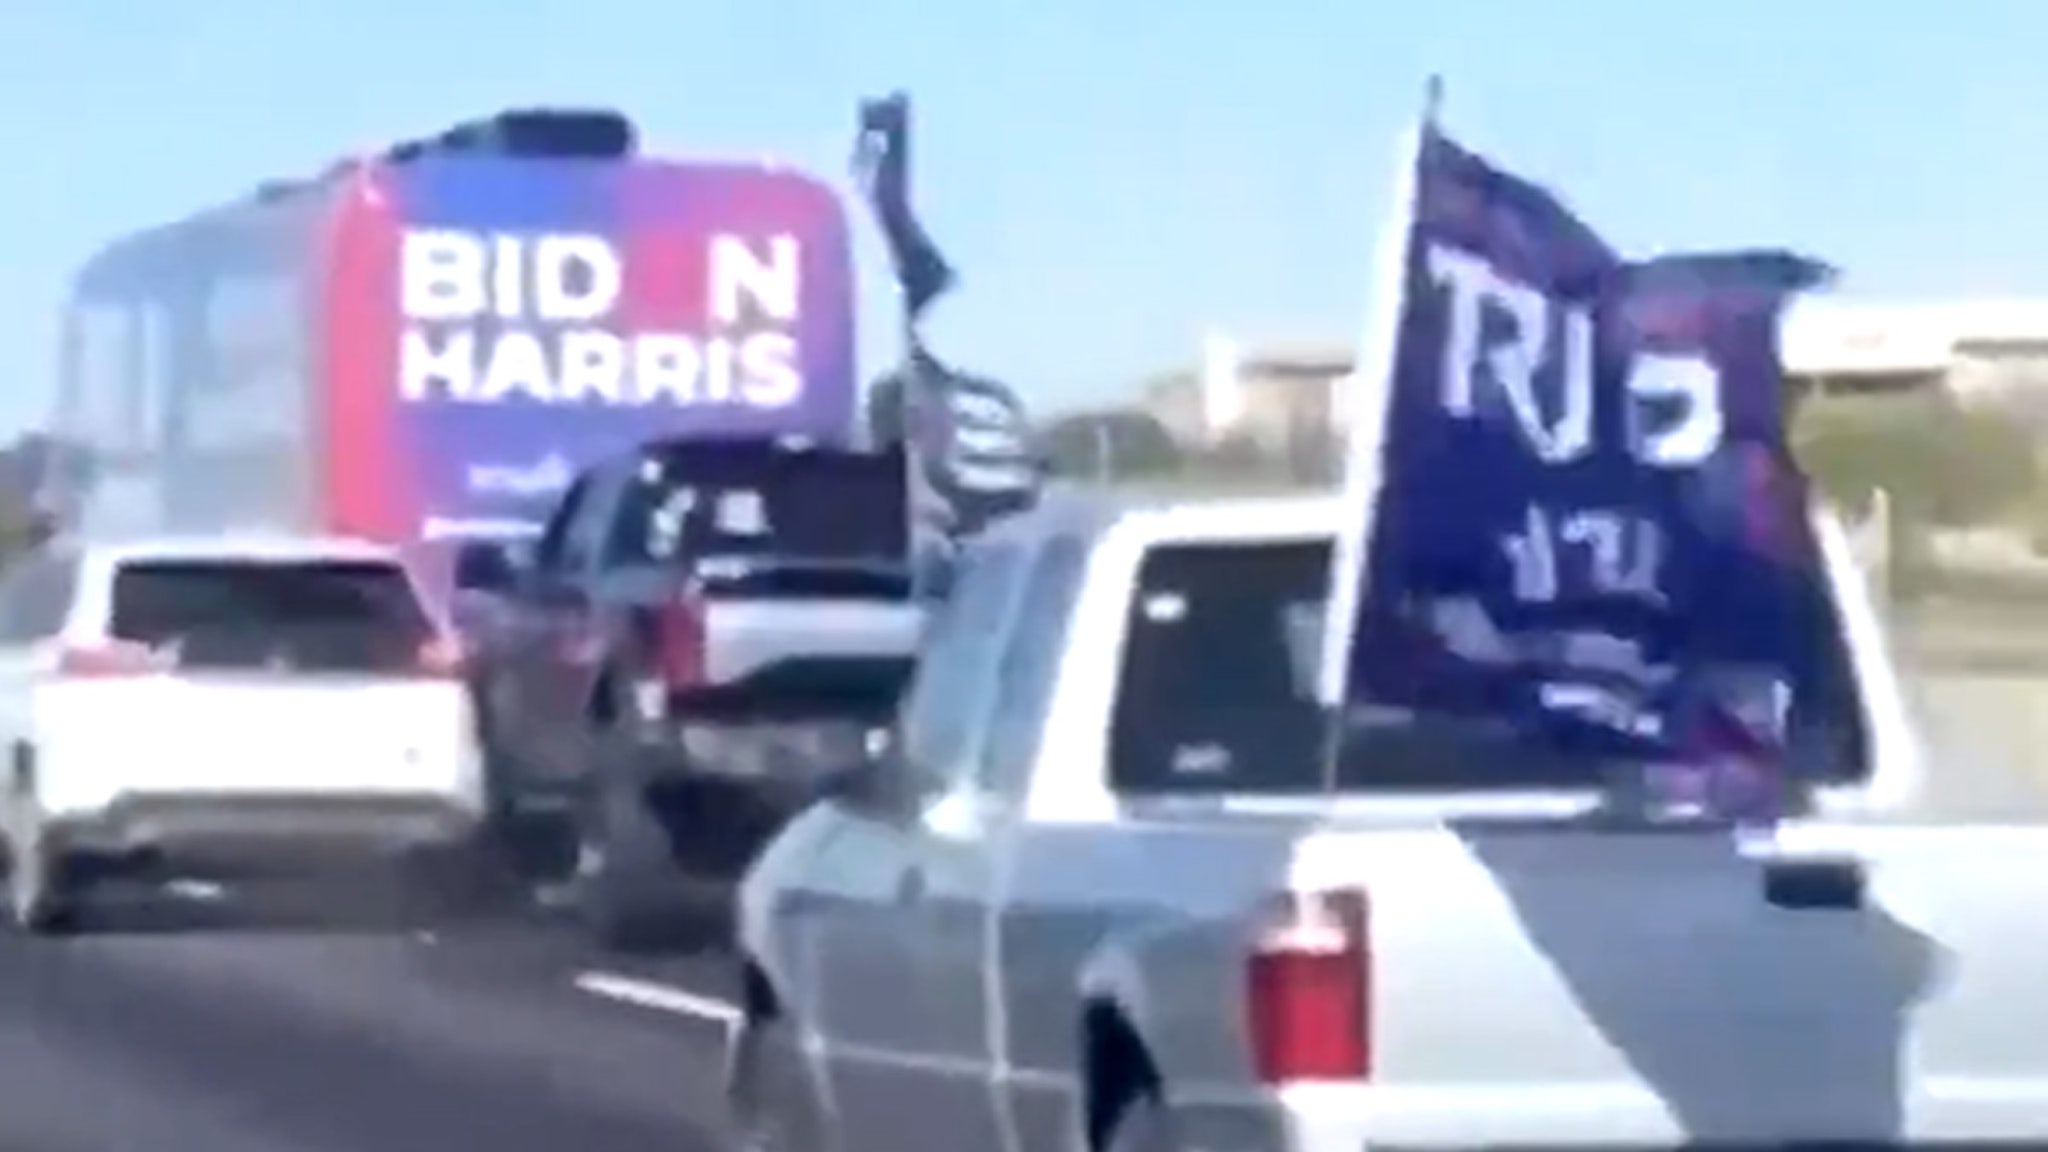 Trump Supporters Succeed in Chasing Biden Bus Out of Austin, TX Area thumbnail